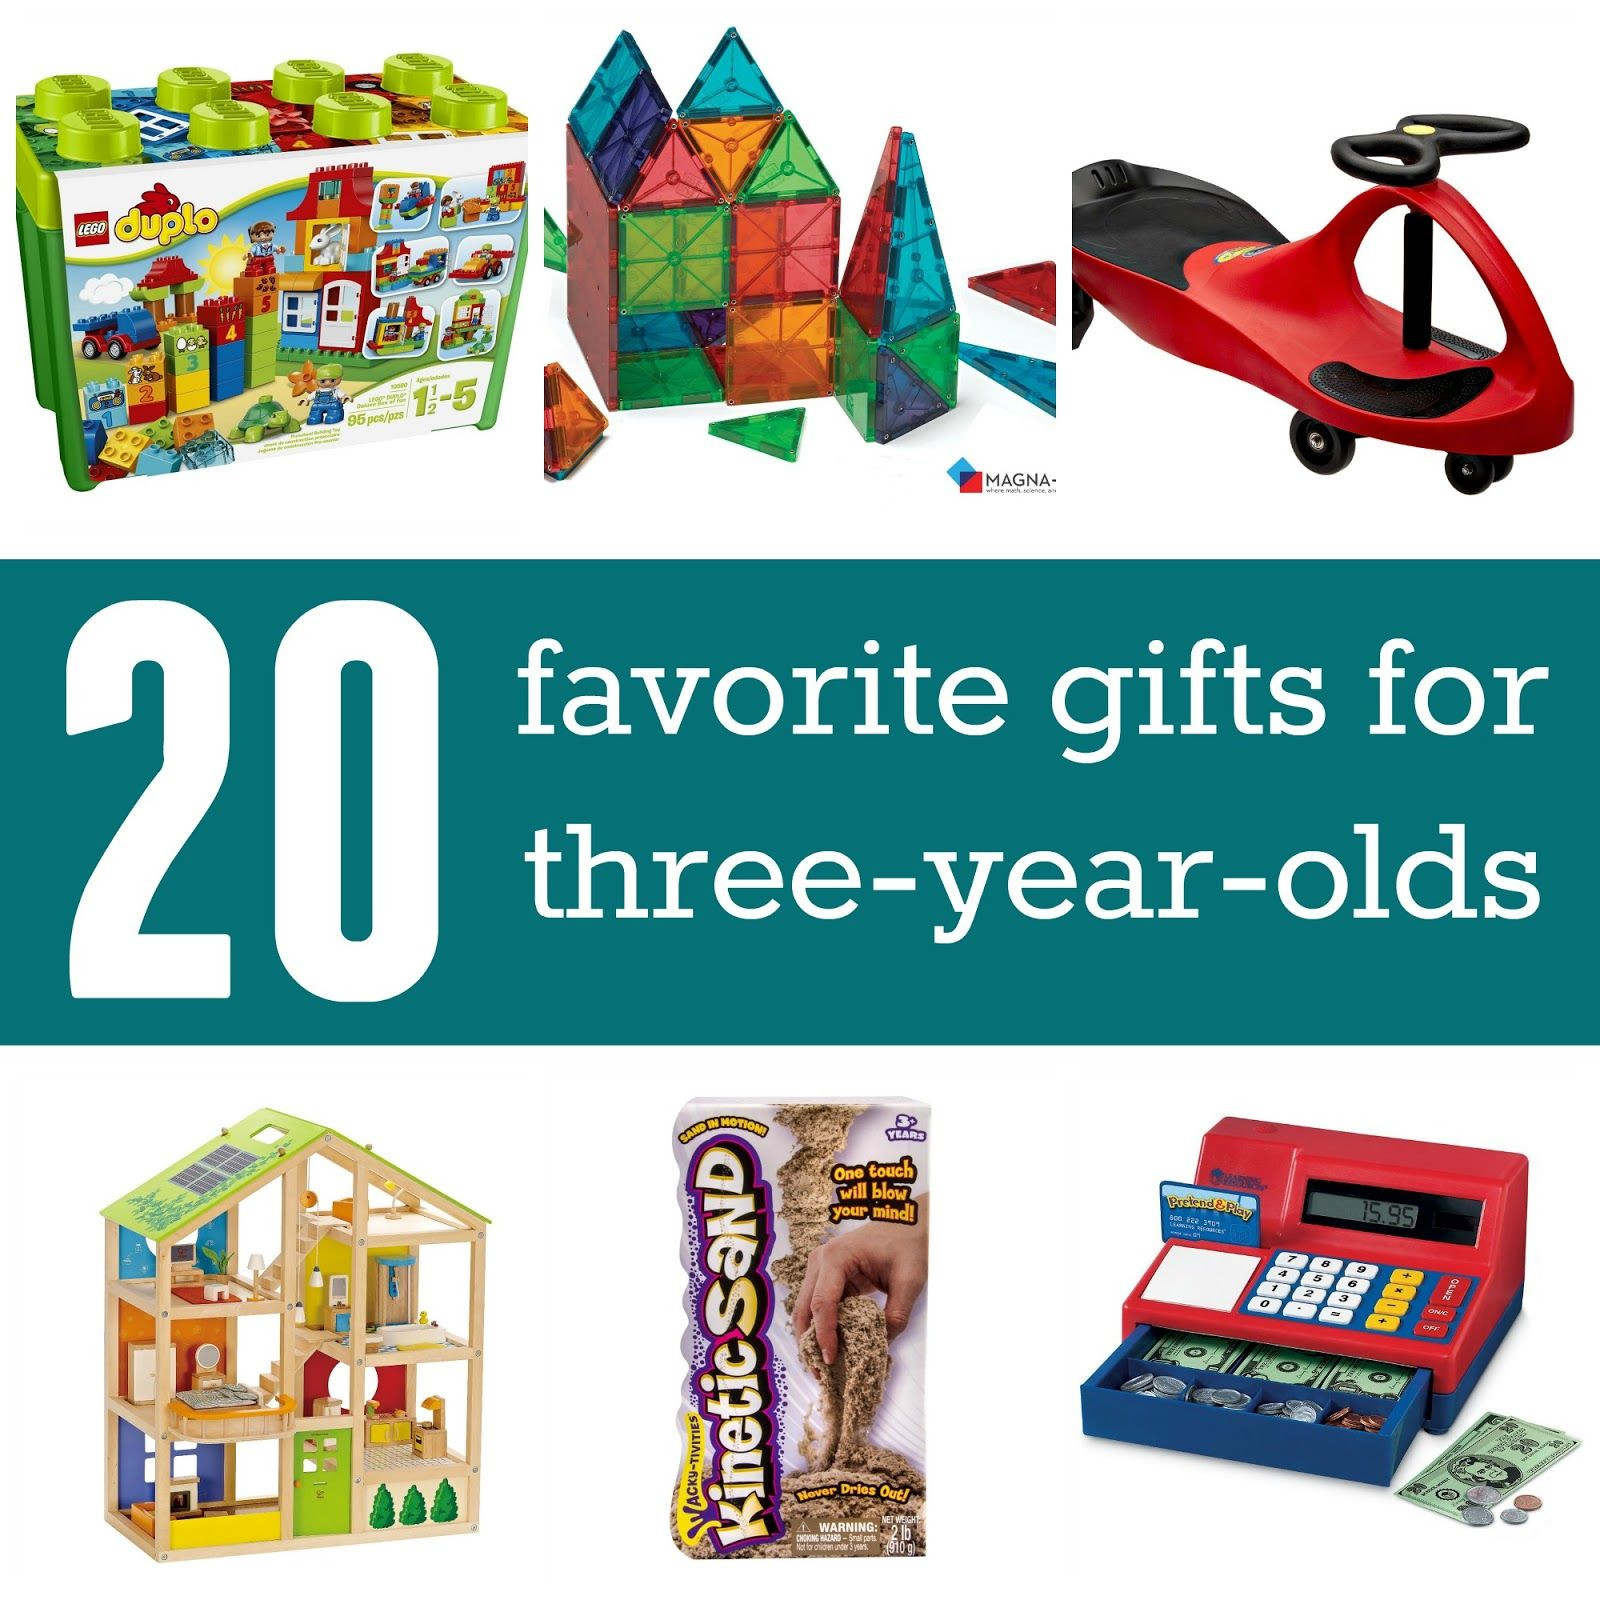 3 Year Old Birthday Gift Ideas Boy
 Favorite Gifts for 3 year olds